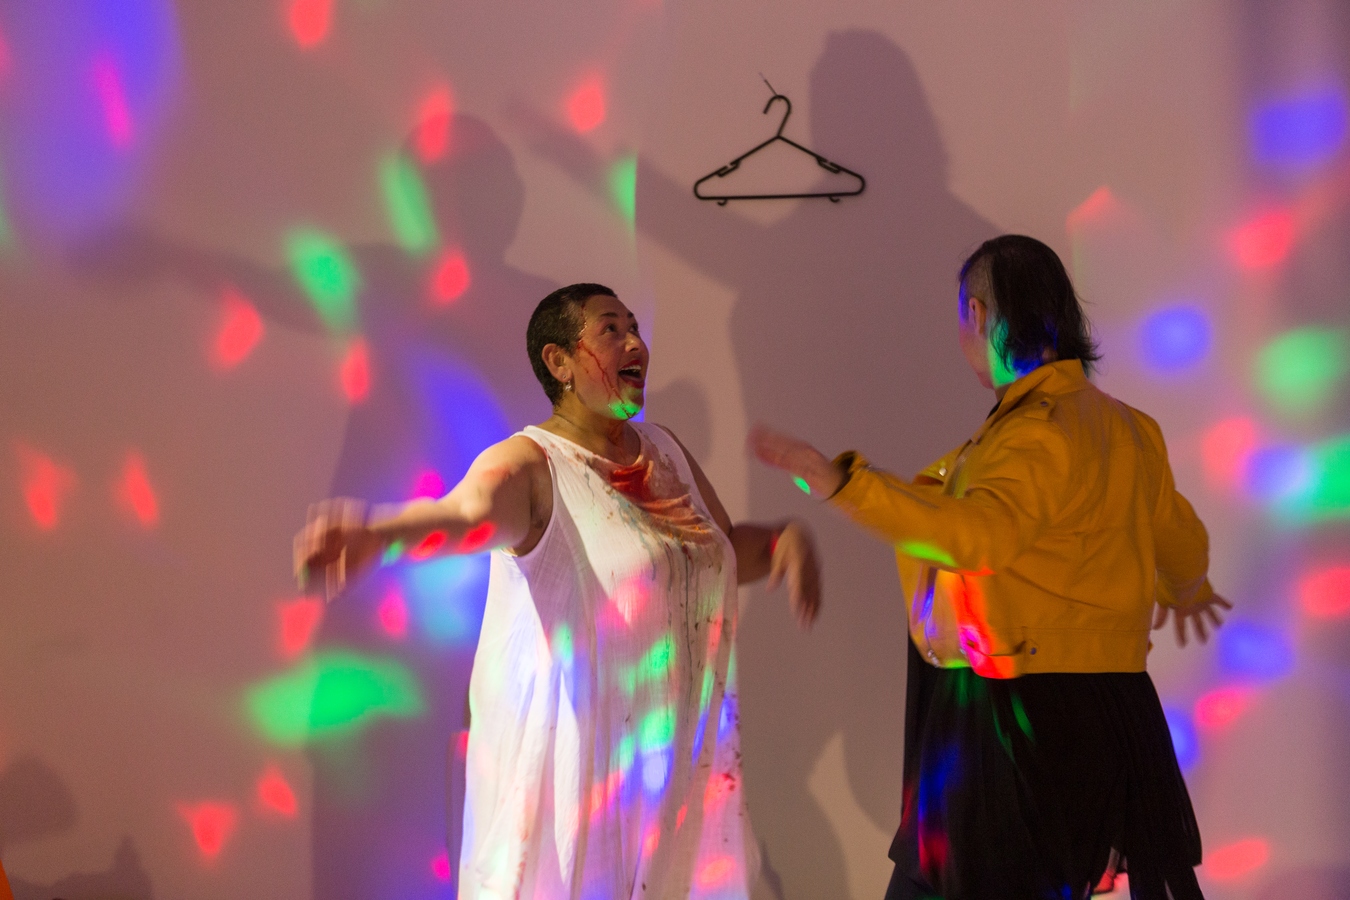 Leafa Wilson & Olga Krause, Unprotected #2: This ain’t no disco, 2017 at the opening of Still, Like Air, I'll Rise. Image: Charlie Rose Creative.